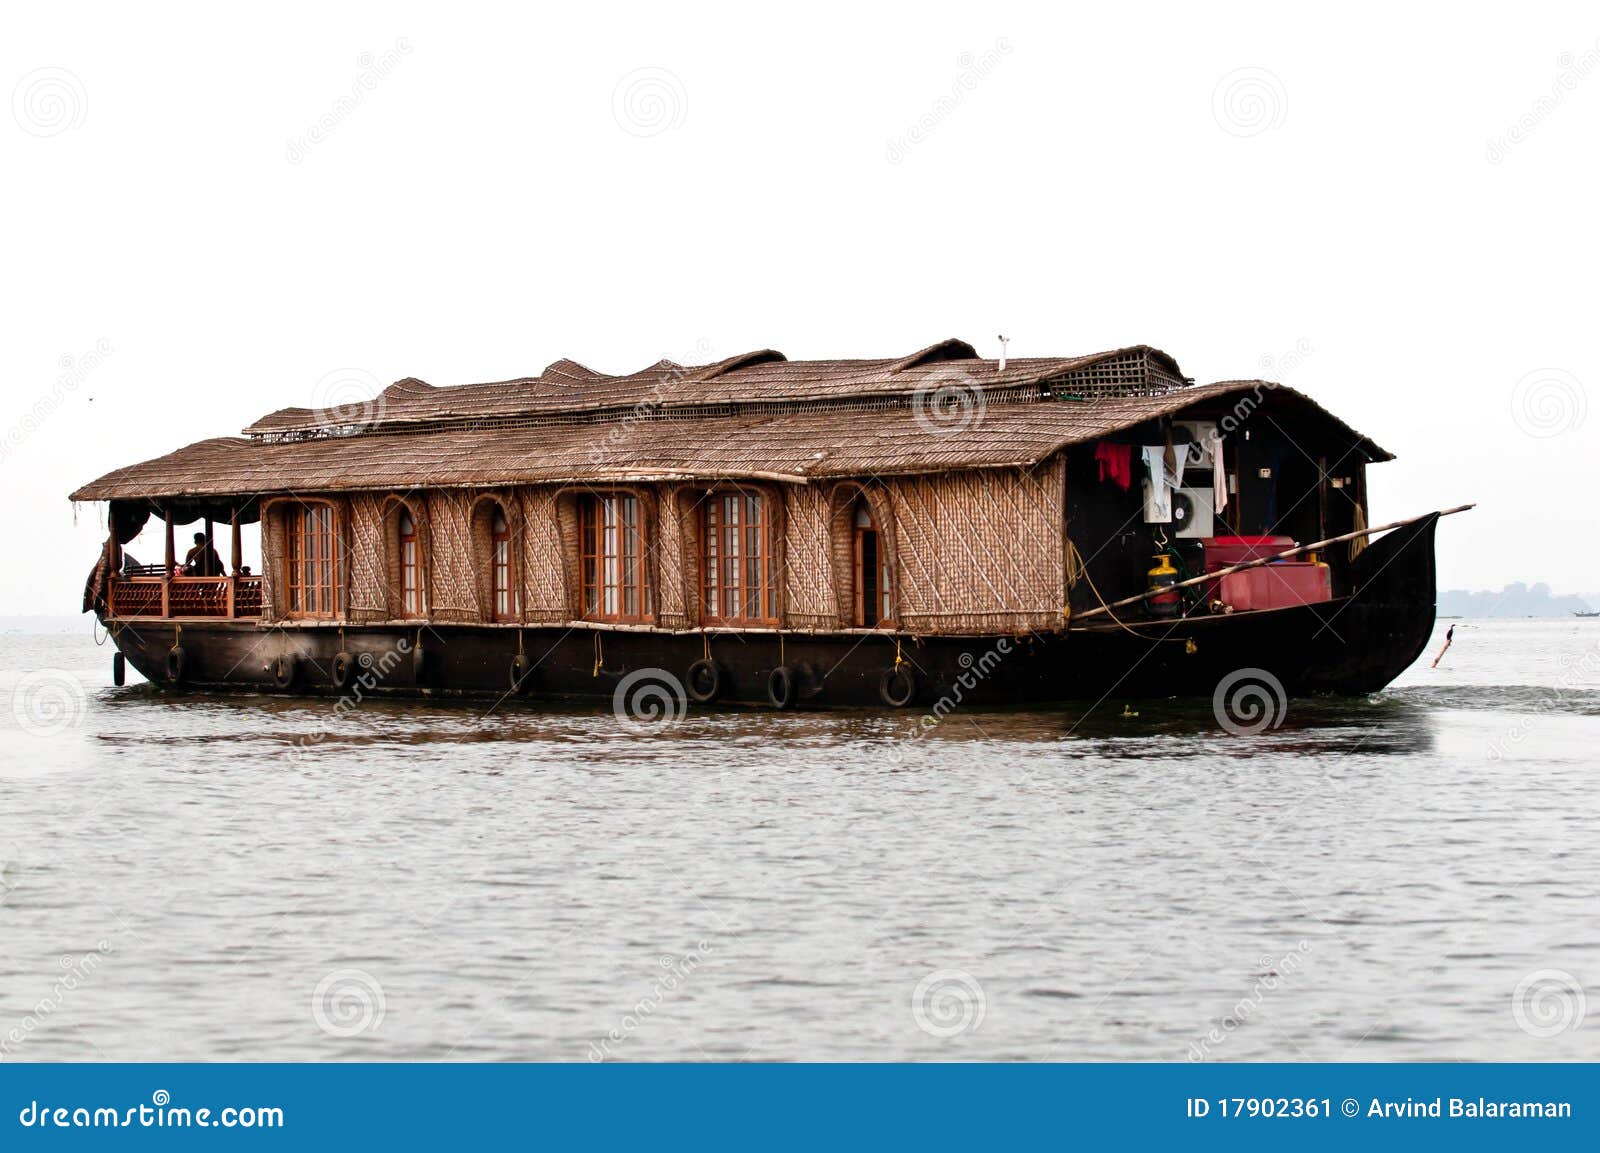 houseboat clipart - photo #24